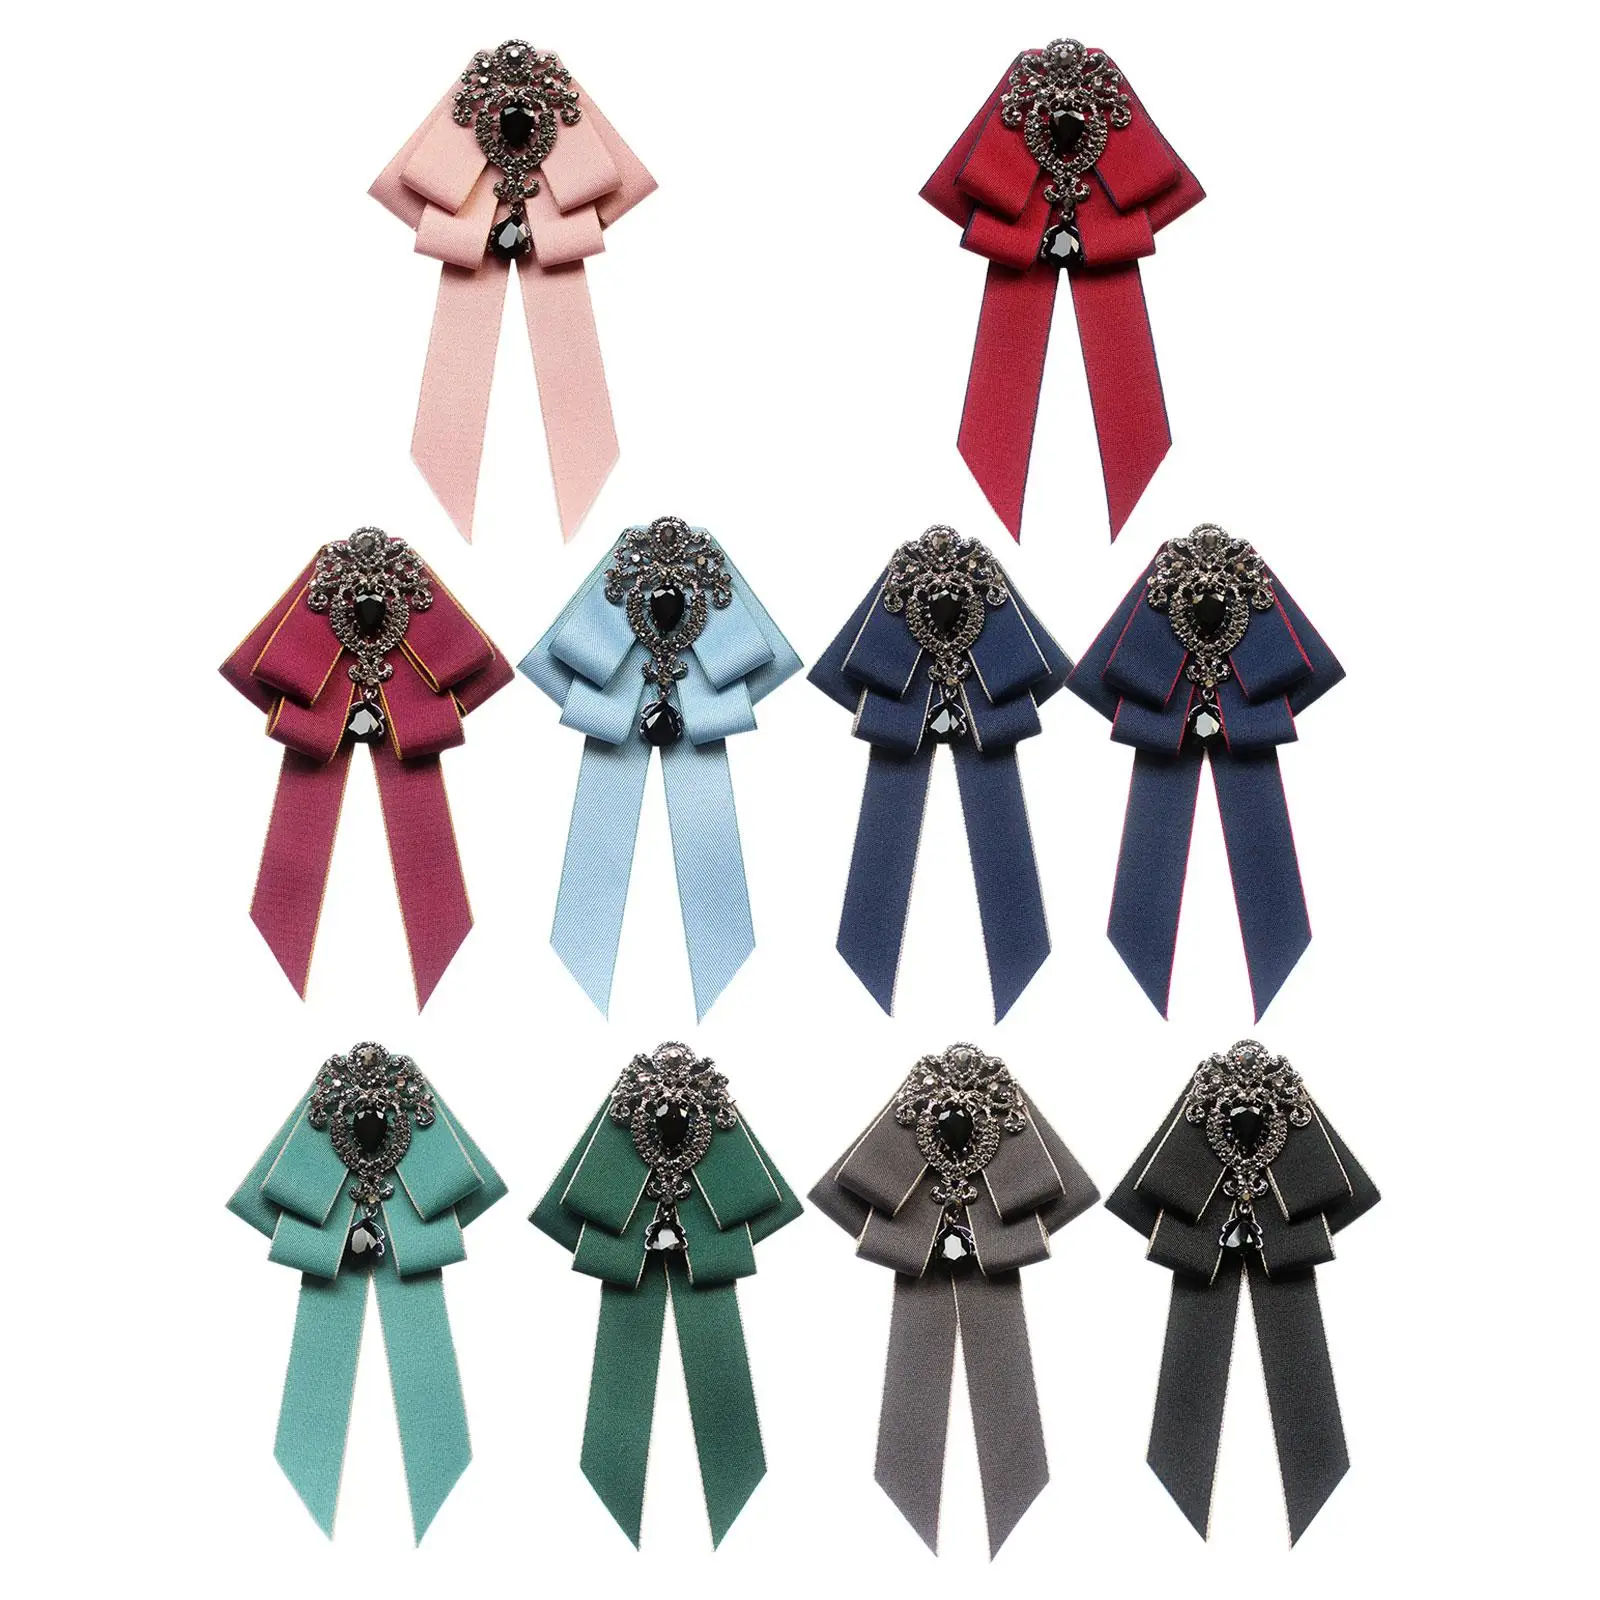 Bow Tie for Women Collar Jewelry Clothing Accessories Fashion Vintage College Style Bowknot Necktie for Party Wedding Girls